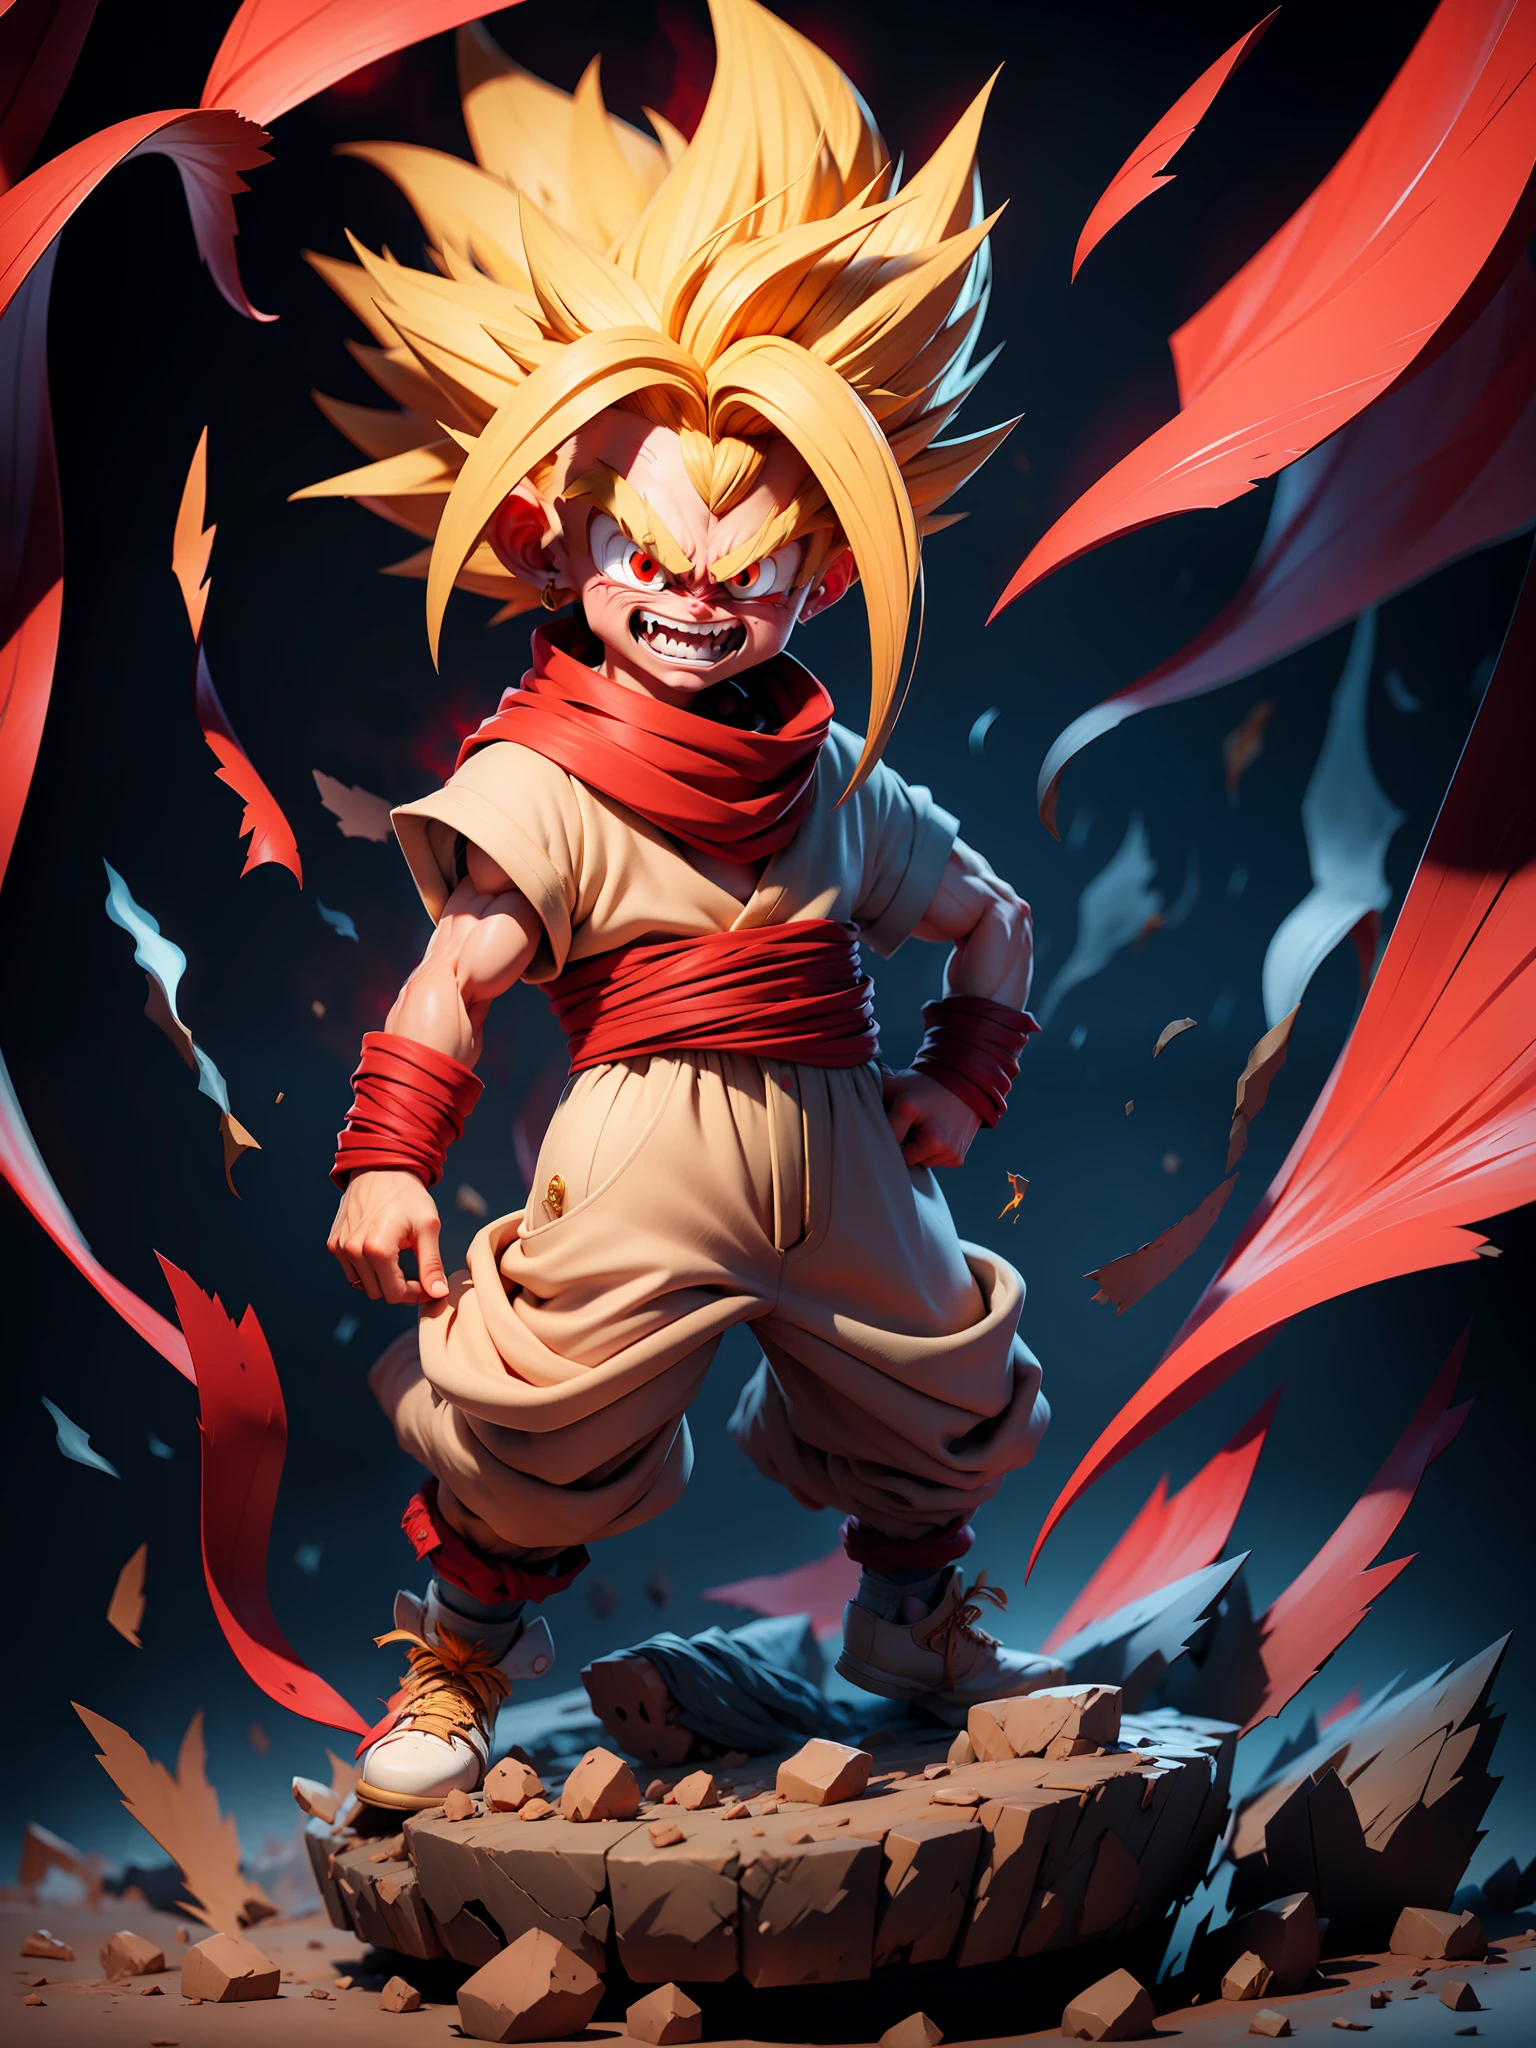 masterpiece, best quality, ultra-detailed, (gold hair on flames)Adult Gohan 1boy, solo, Full body, evil grin, gold hair, spiked hair, (((red eyes))), (((perfect eyes))),(eyes covered with white cloth, dangling from behind) (((Red dougi))), full body, looking at viewer, male focus, earth \(planet\), planet, cracked ground and lots of rocks rising up, lots of debris going up, perfect hands . Cute,angry (flames) (explosions), (powerful aura) (thunder and lightning) dragon backward, apocalyptic scene of city